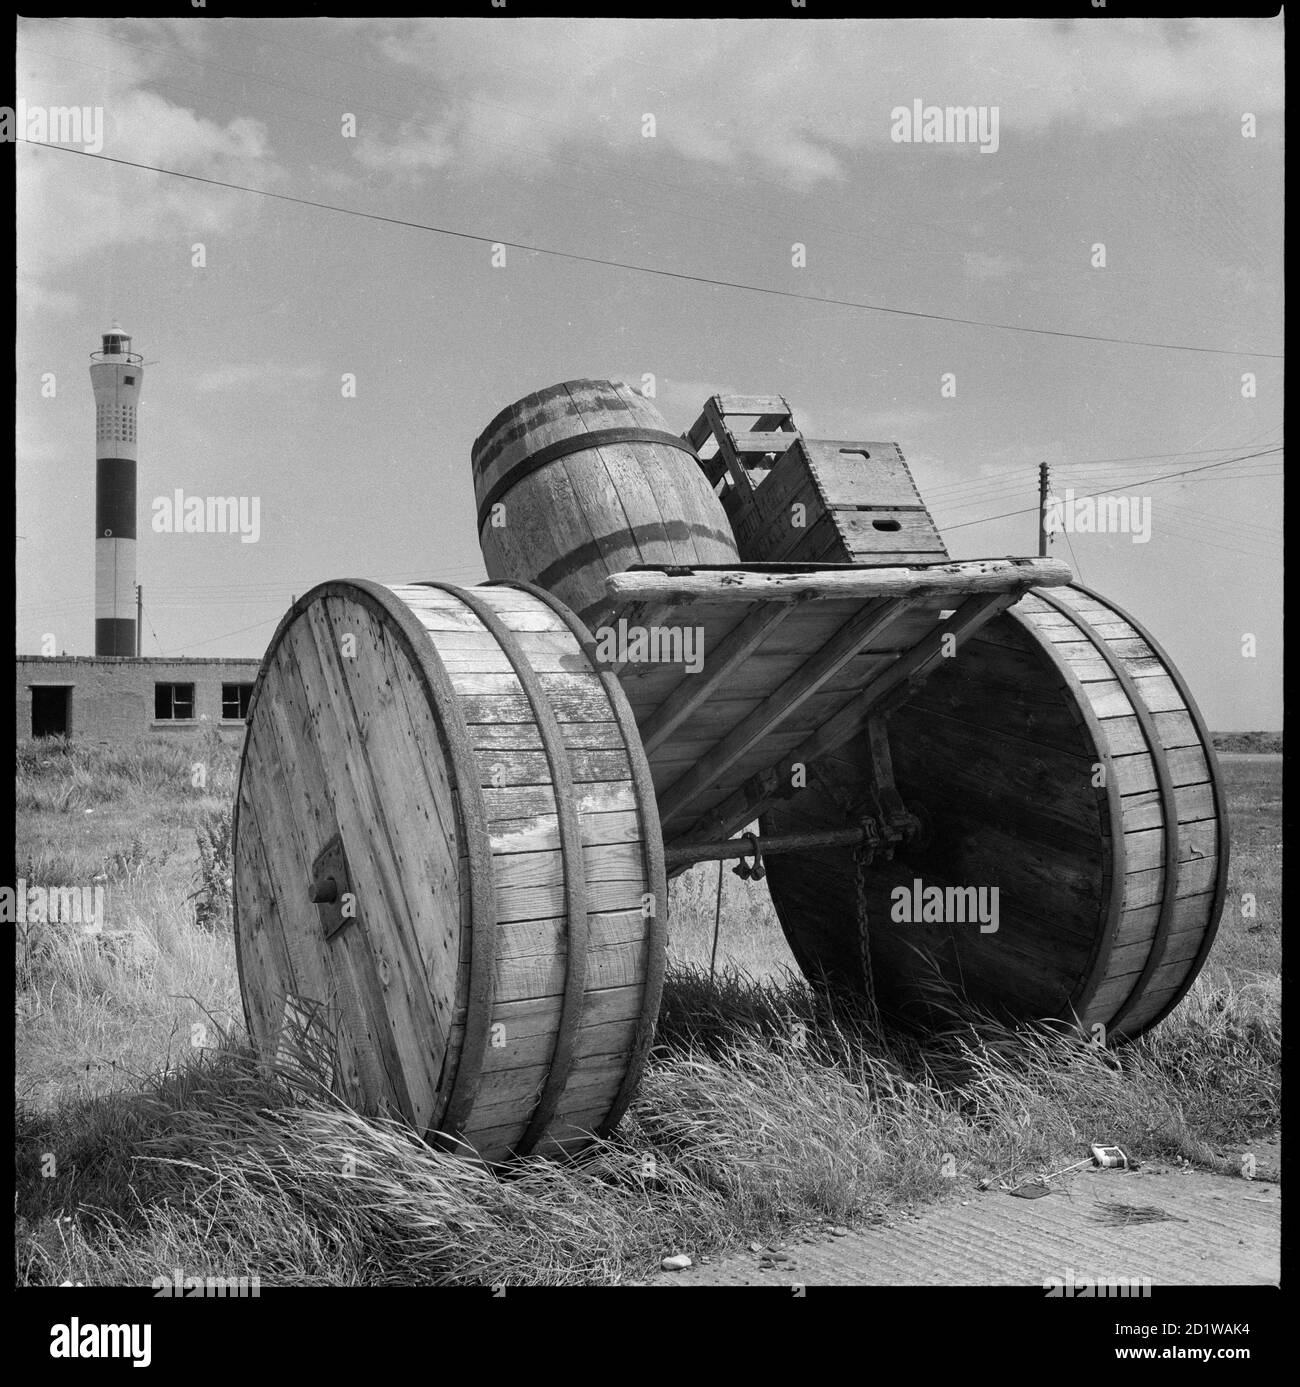 Dungeness, Lydd, Shepway, Kent. A horse-drawn cart loaded with beer crates and a barrel on display in the car park beside Dungeness Old Lighthouse, with the new lighthouse visible in the background. Stock Photo